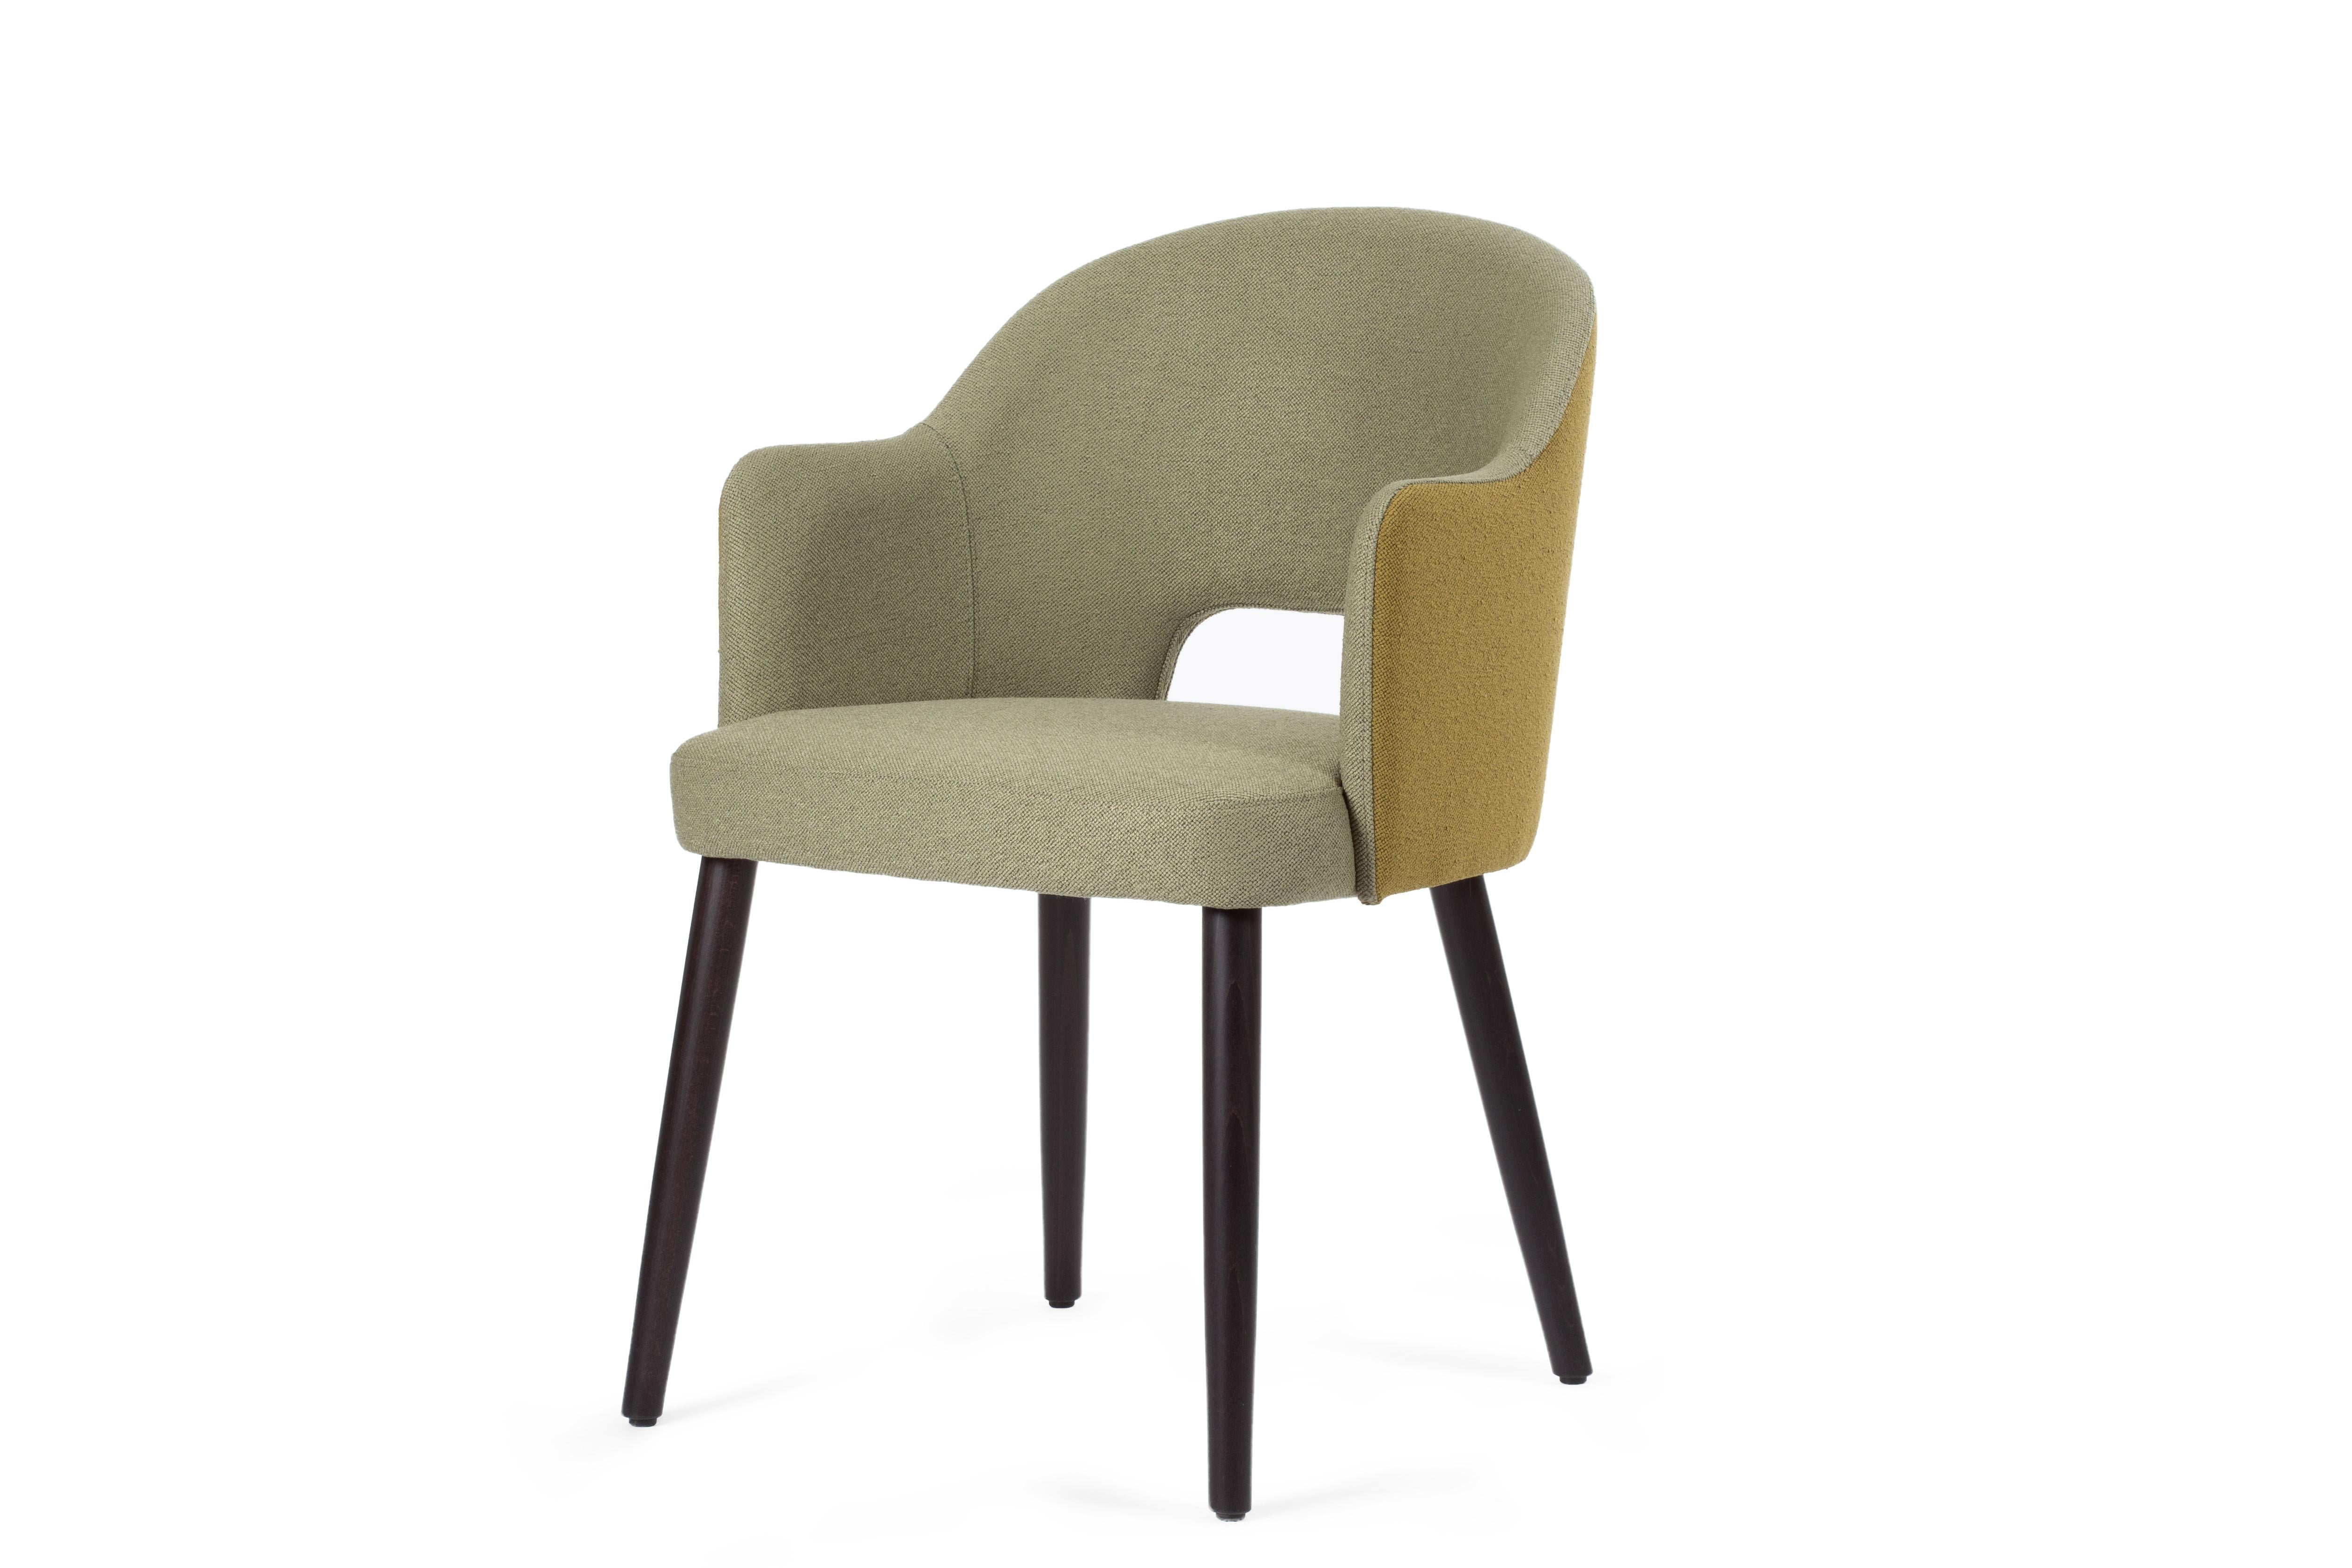 Italian 21st Century Ary Chair, Free Life Fabric and Wood, Made in Italy by Hebanon For Sale